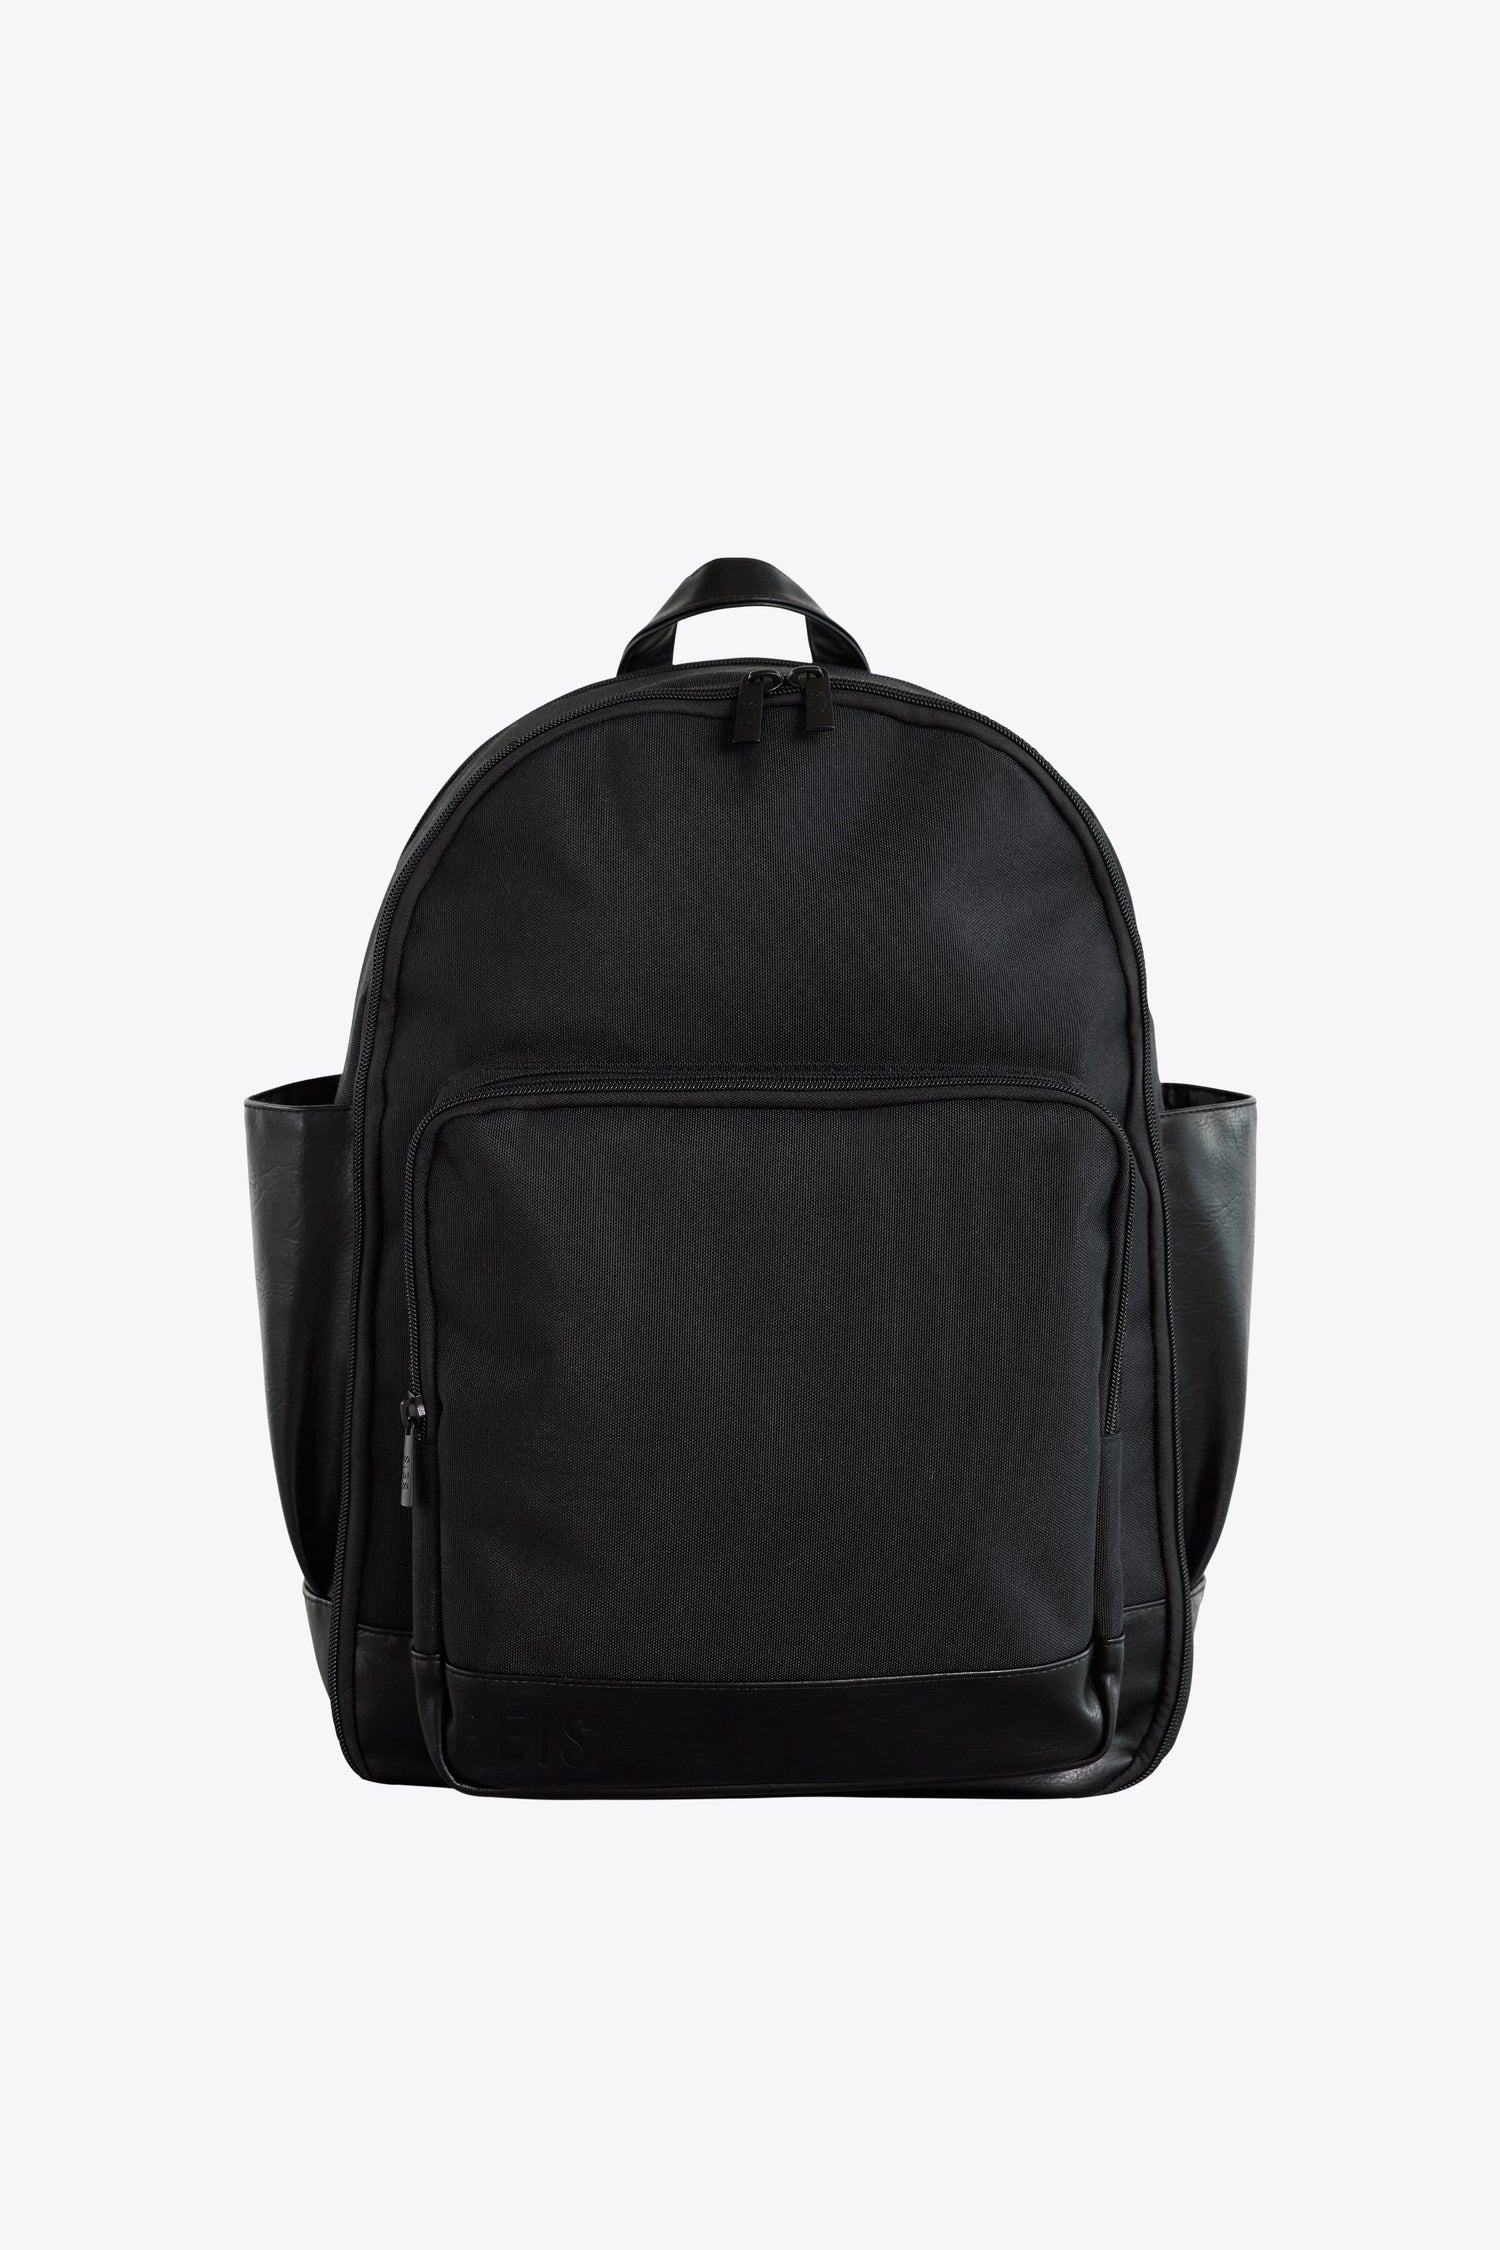 Backpack Comparison Guide